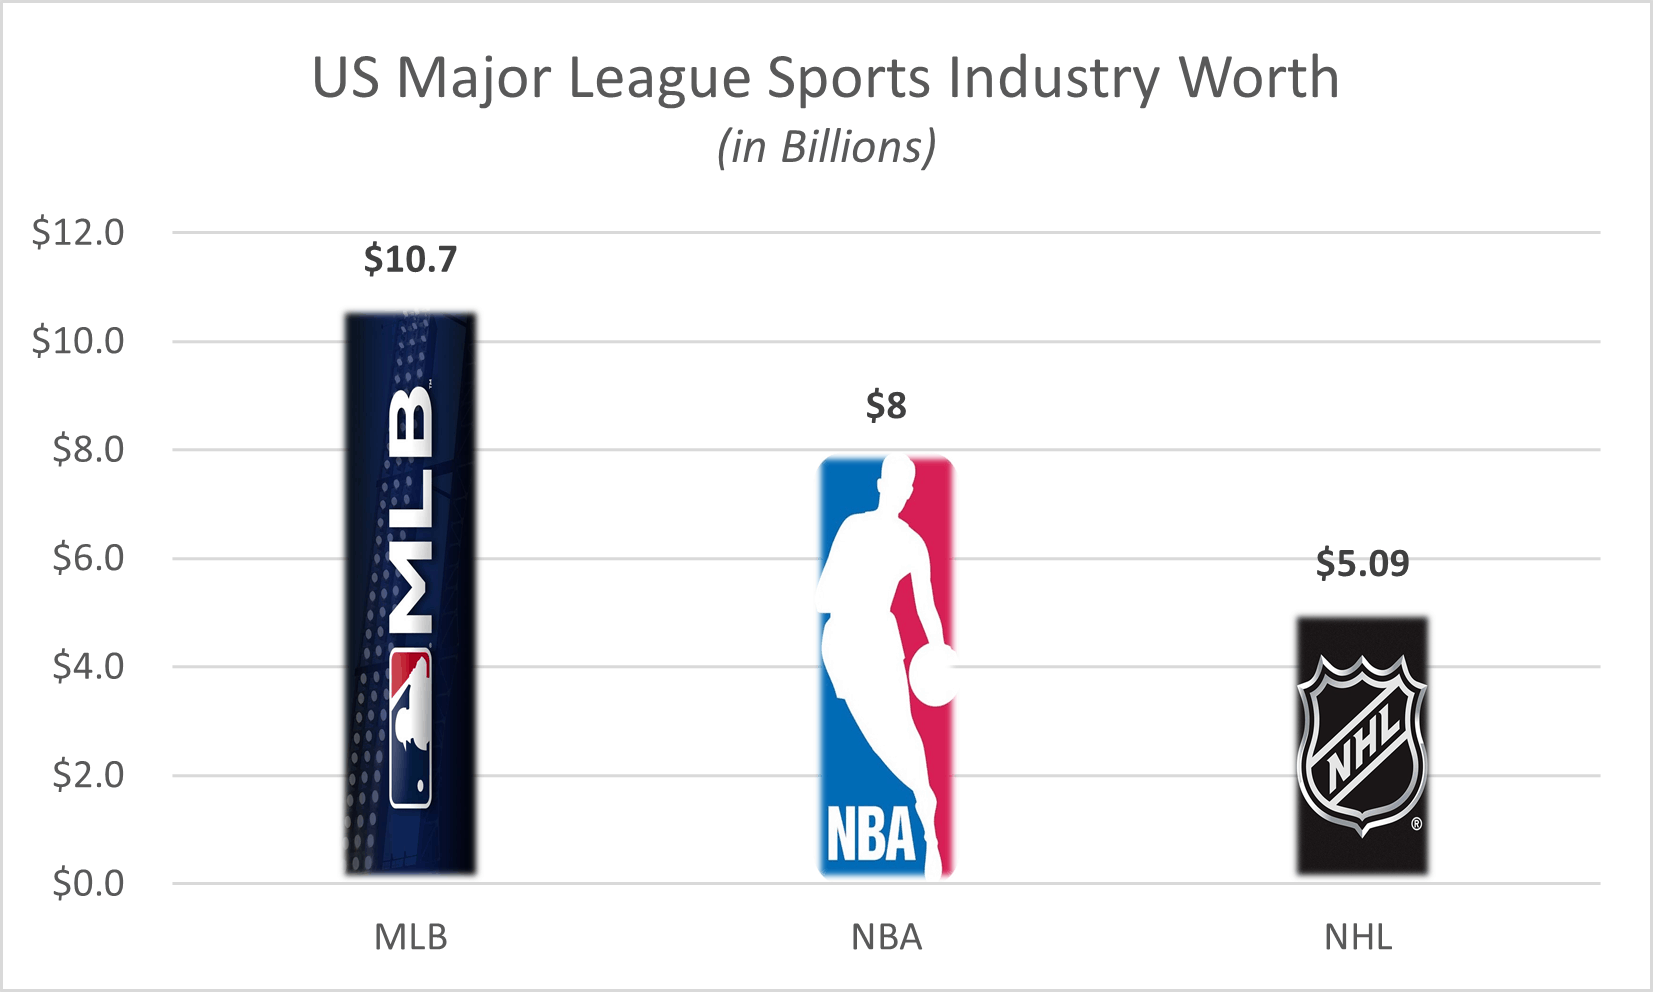 Are Major League Sports Sponsorships Worth It?